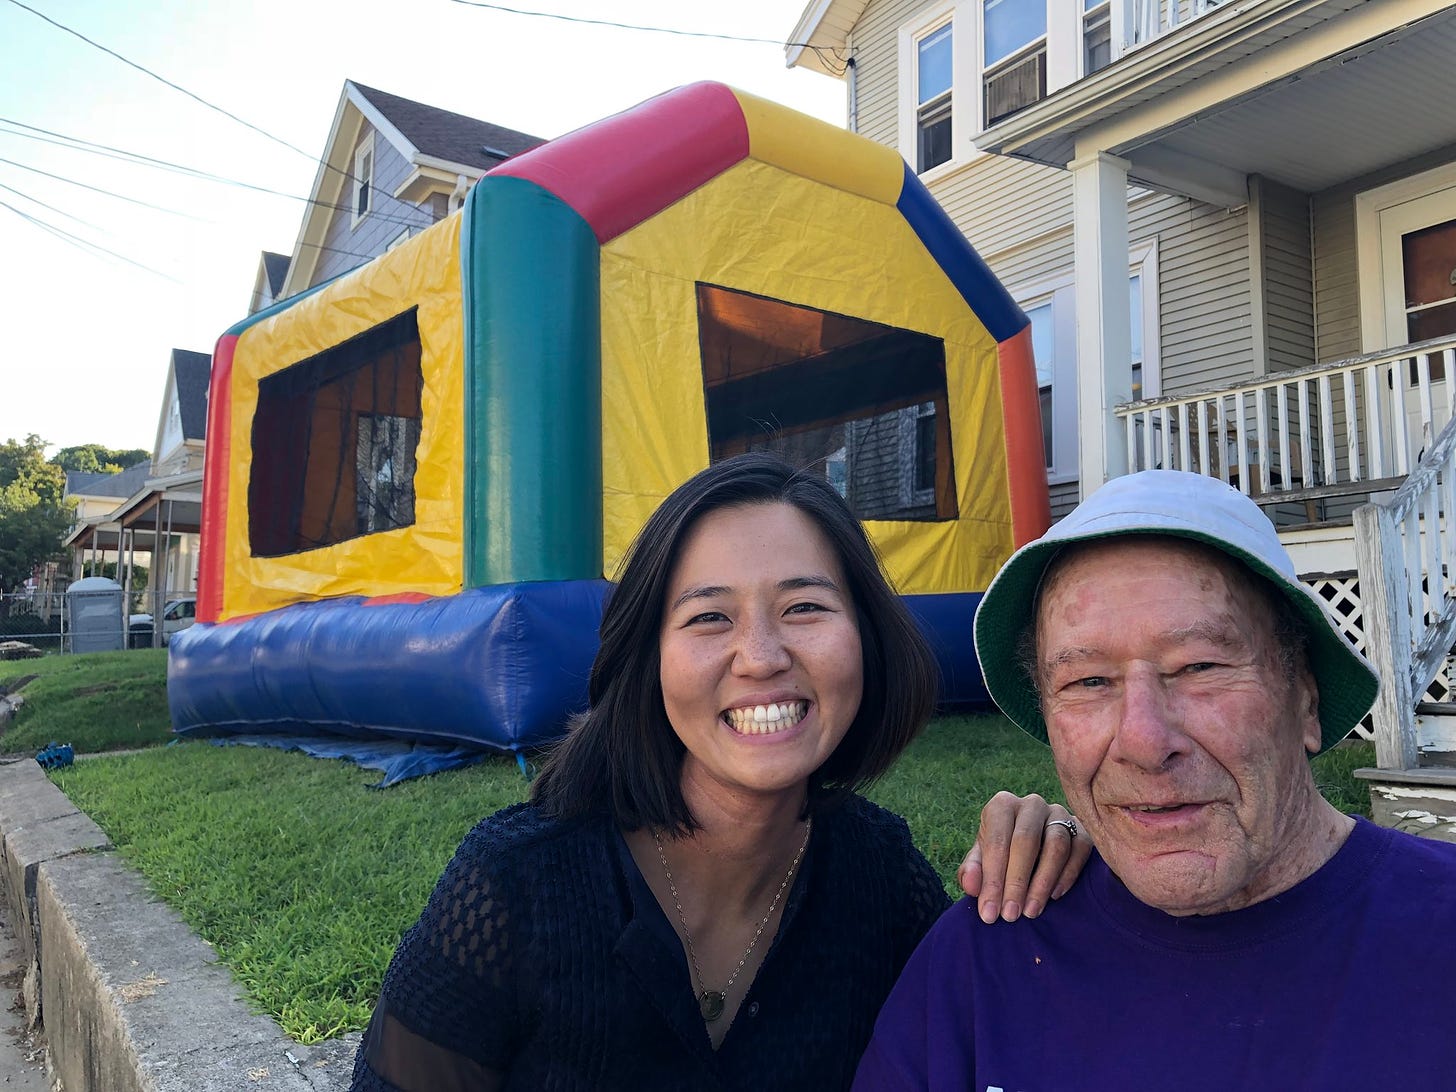 Michelle takes a picture with her neighbor Joe in front of the bouncy house set up for the block party